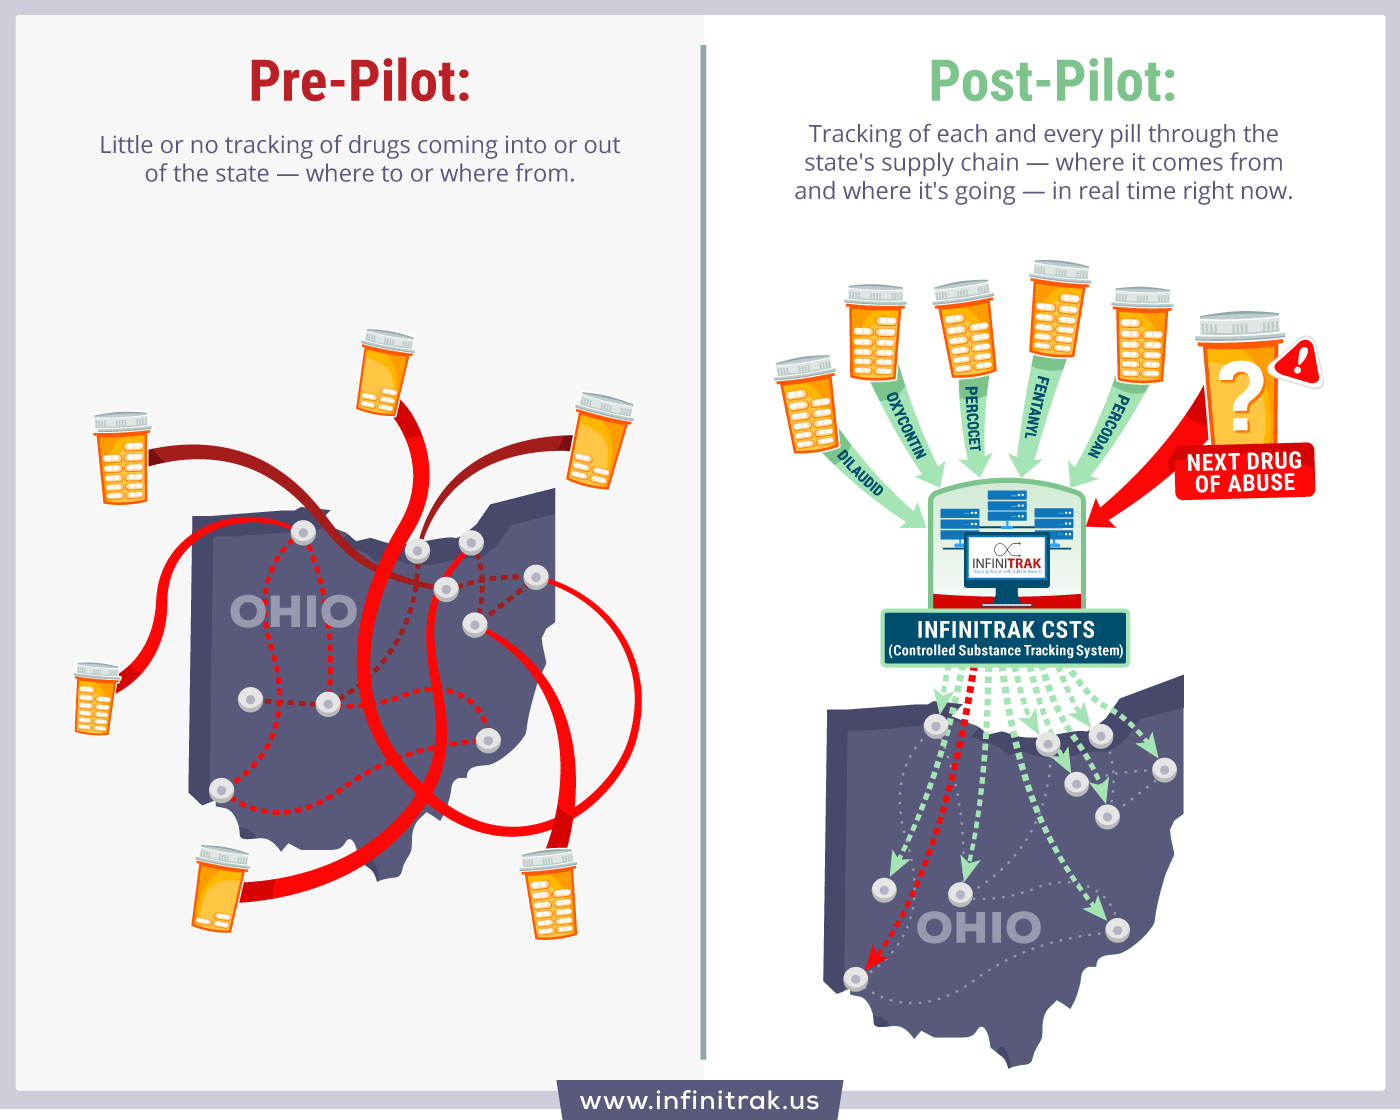 Infographic about Pre-pilot and Post-Pilot with InfiniTrak in Ohio